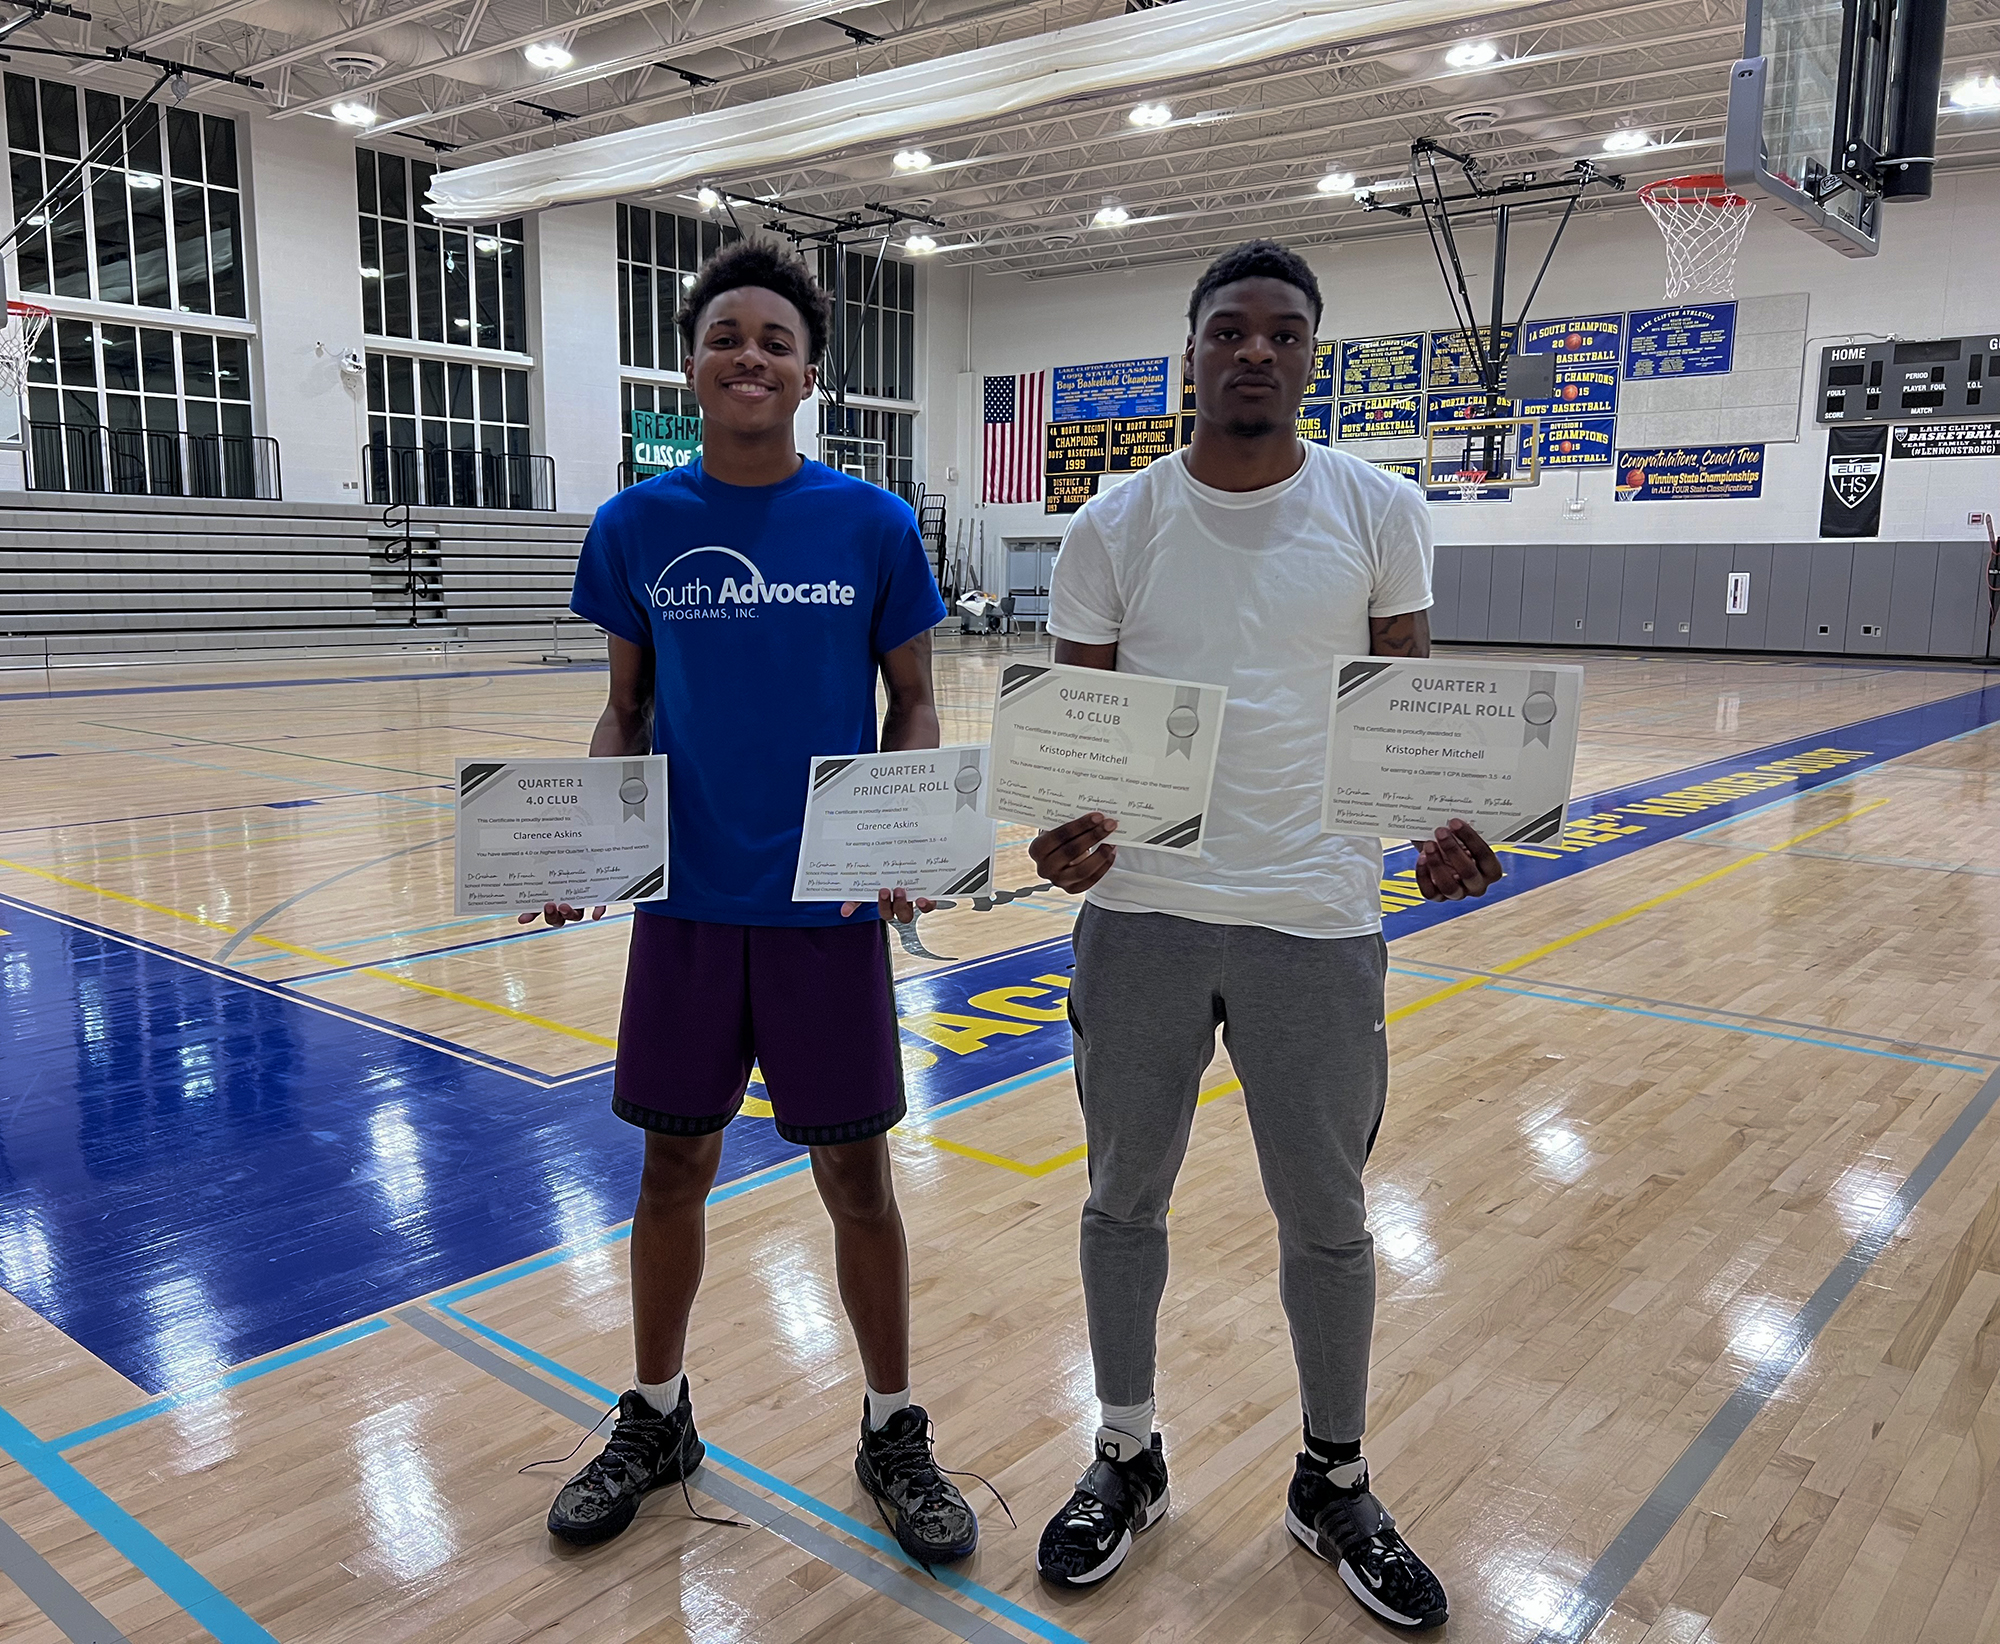 Clarence “Ray” Askins (left), 17, and Kristopher Mitchell (right), 17, show off their 4.0 GPA certificates in the gym of the REACH! Partnership school. Photo by Victoria Vandergriff/Capital News Service